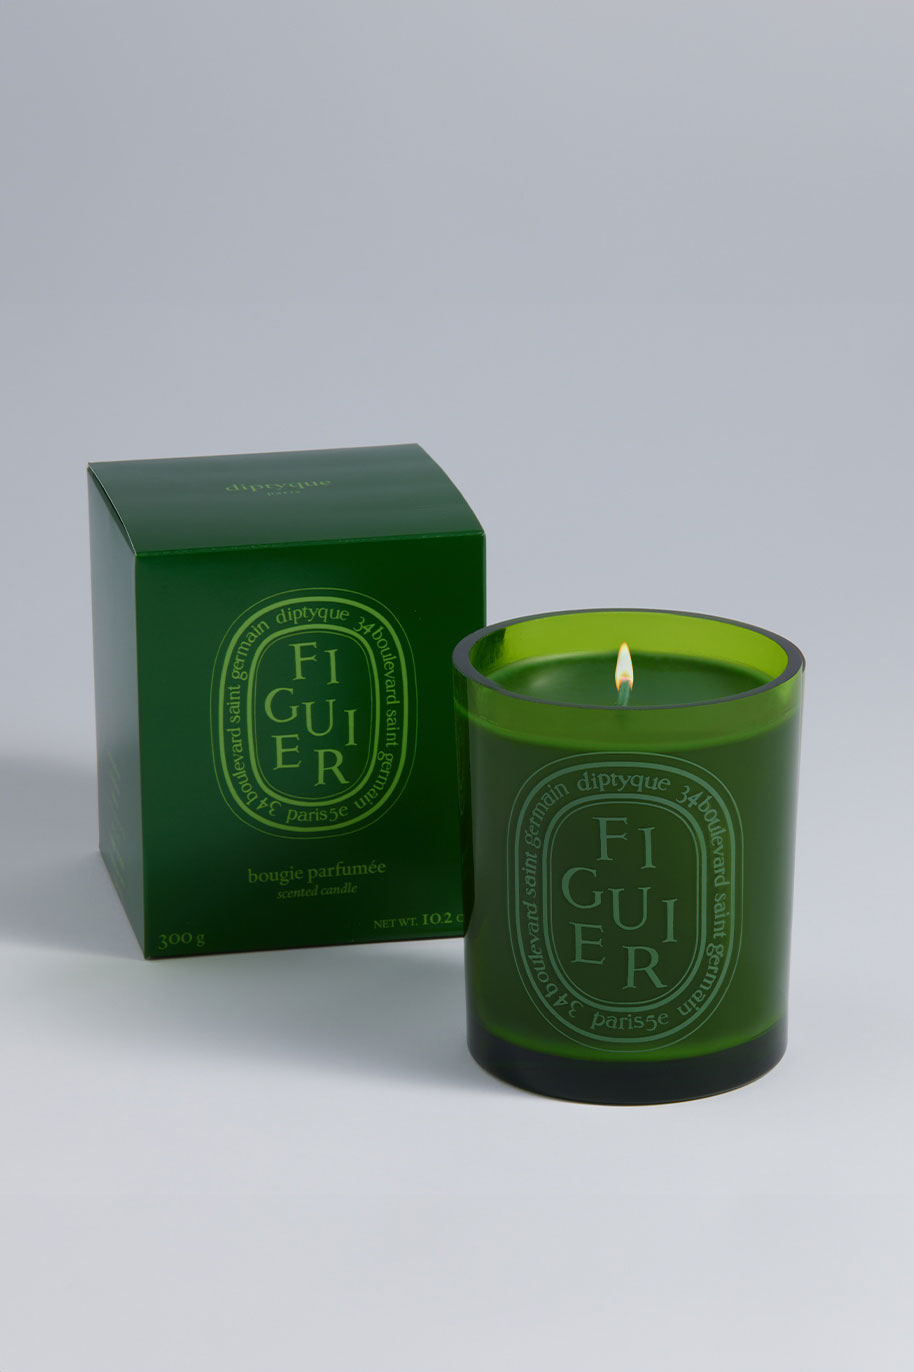 Diptyque for The Ritz-Carlton Figuier/Fig Tree Porcelain Candle Image